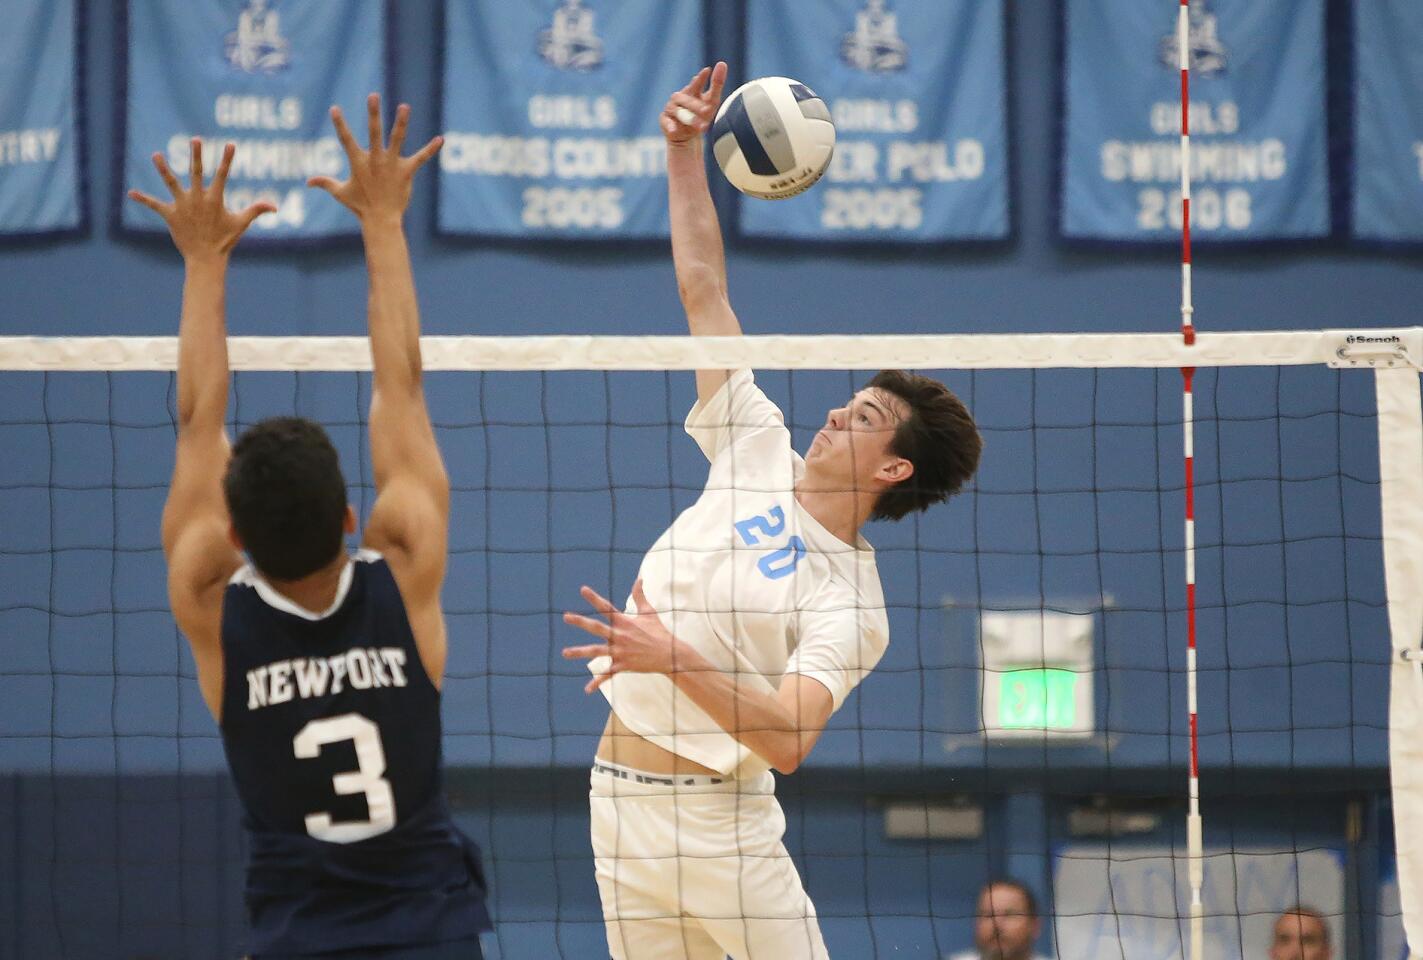 Corona del Mar's Adam Flood (20) makes a kill past Newport Harbor's Joe Karlous during second round of the Battle of the Bay boys' volleyball match in Surf League play on Wednesday.